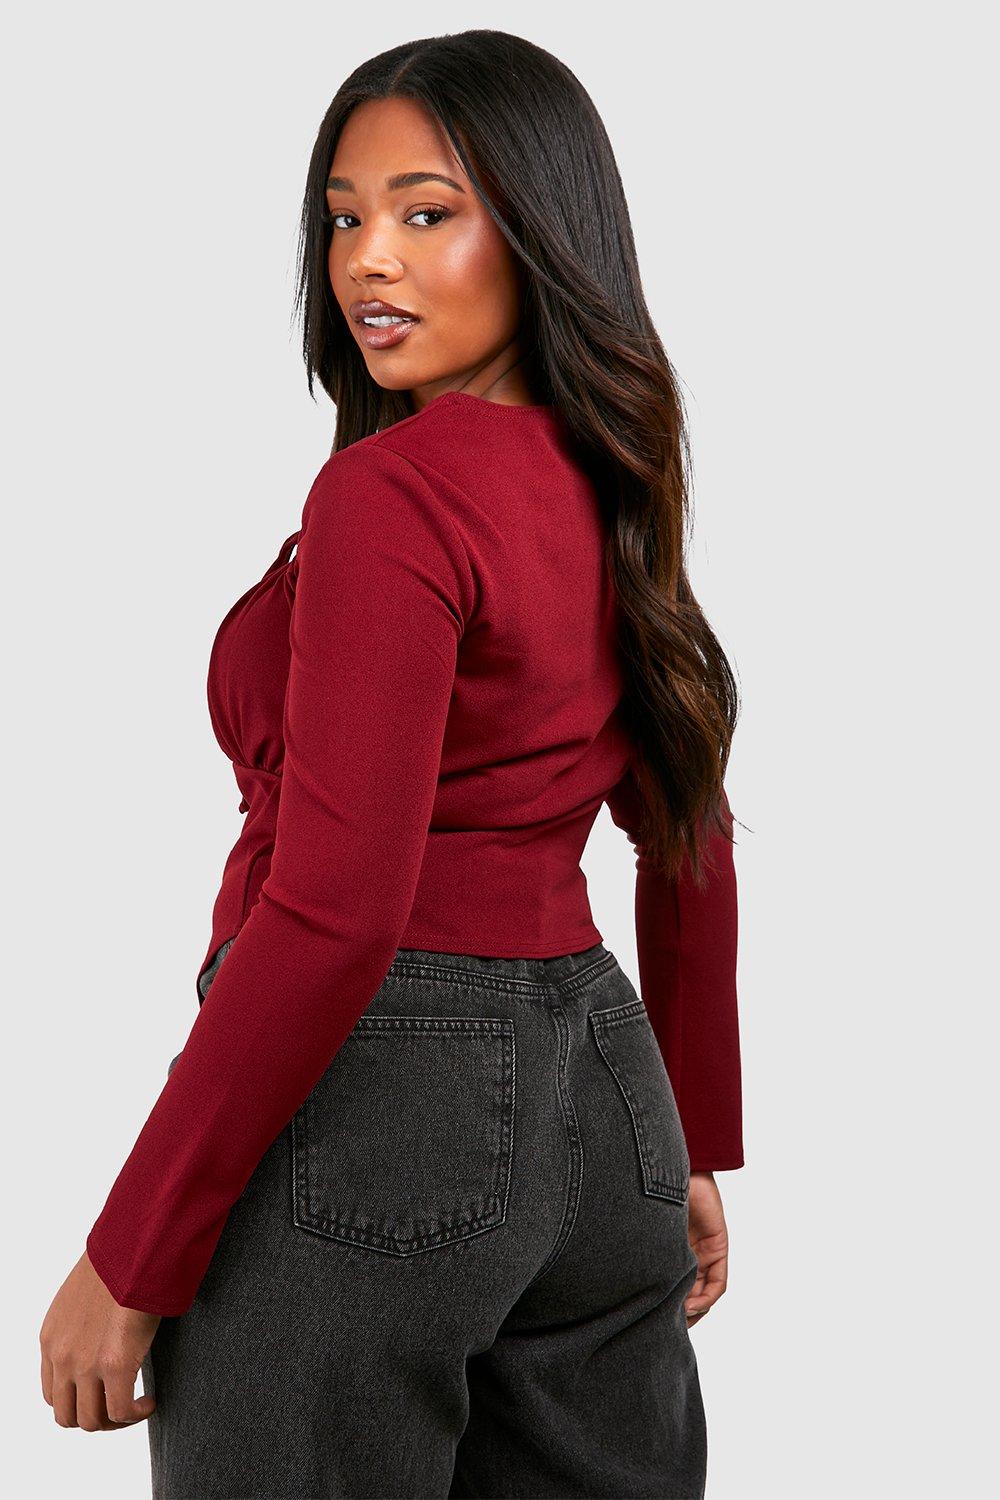 Long Sleeve Corset Top with Bow Tie Neck Fitted Crop Top e-Girl